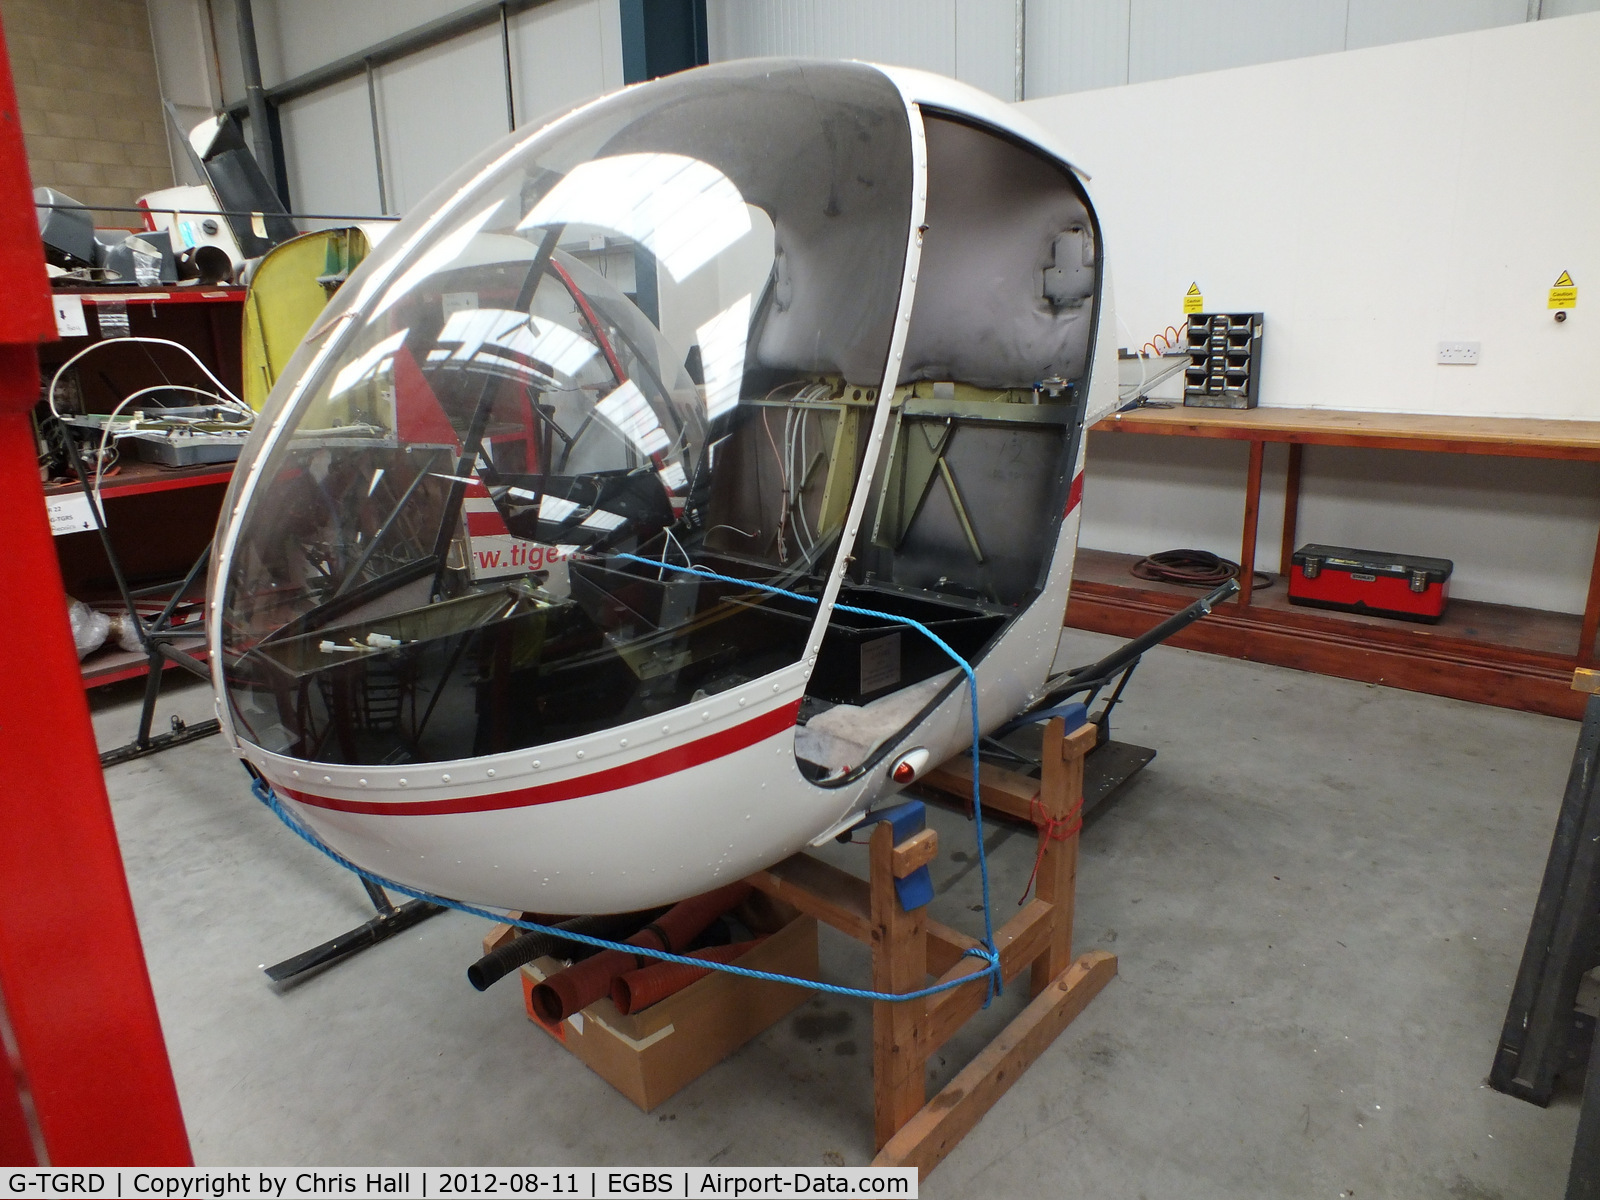 G-TGRD, 1997 Robinson R22 Beta II C/N 2712, inside the Tiger Helicopter's Hangar at Shobdon Airfield, Herefordshire